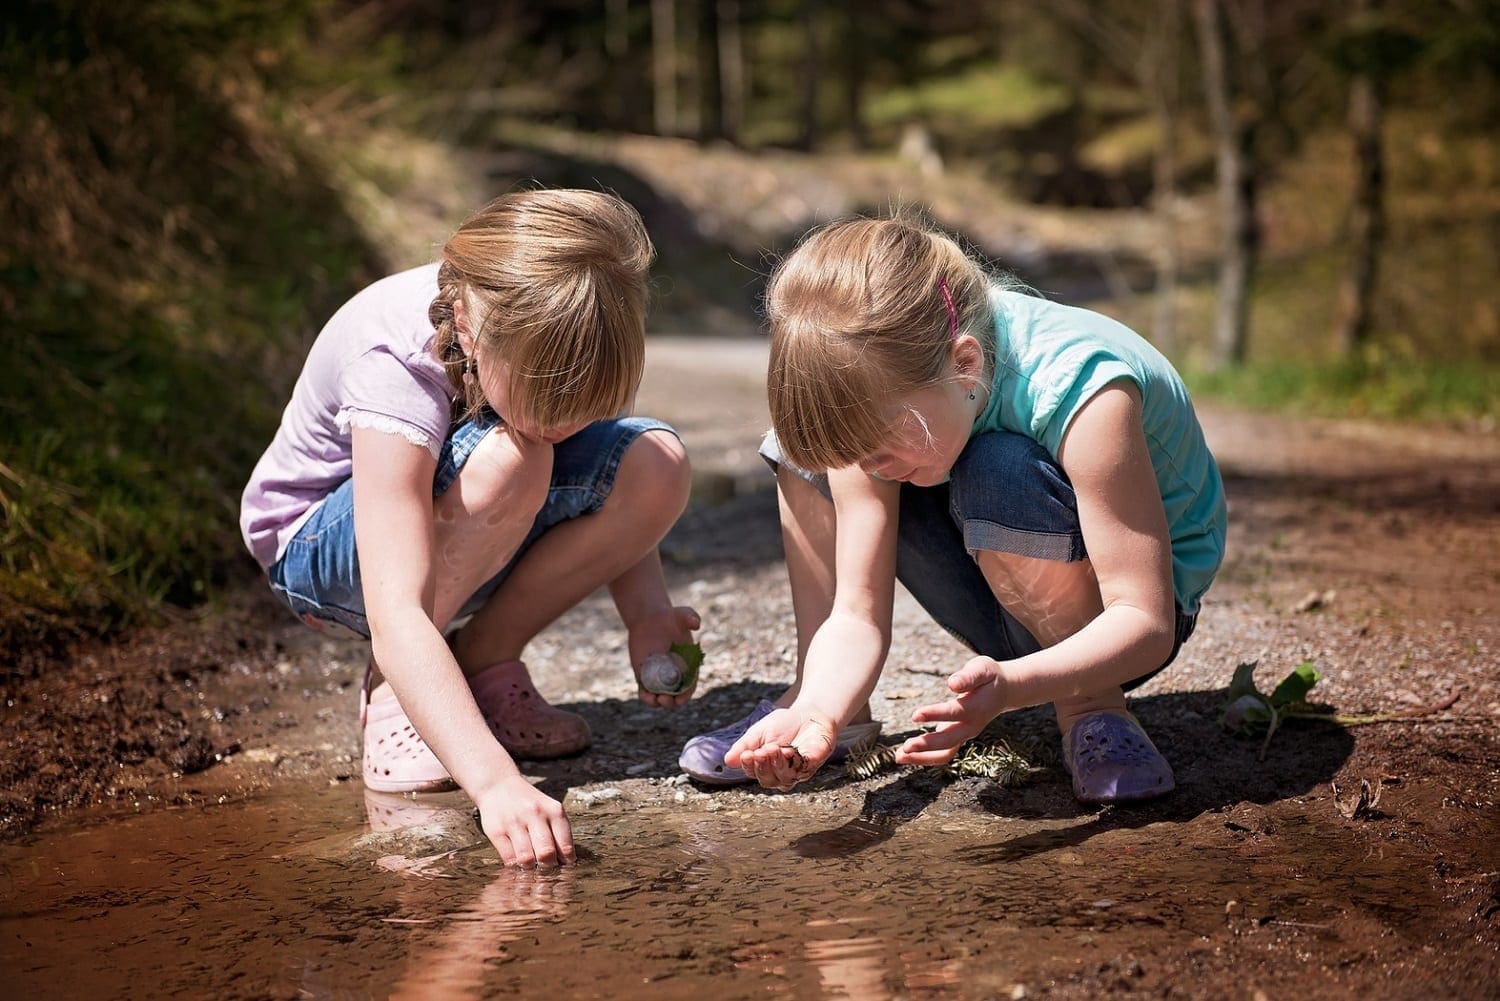 Girls playing in a mud bottomed puddle, photo credit: Pxhere